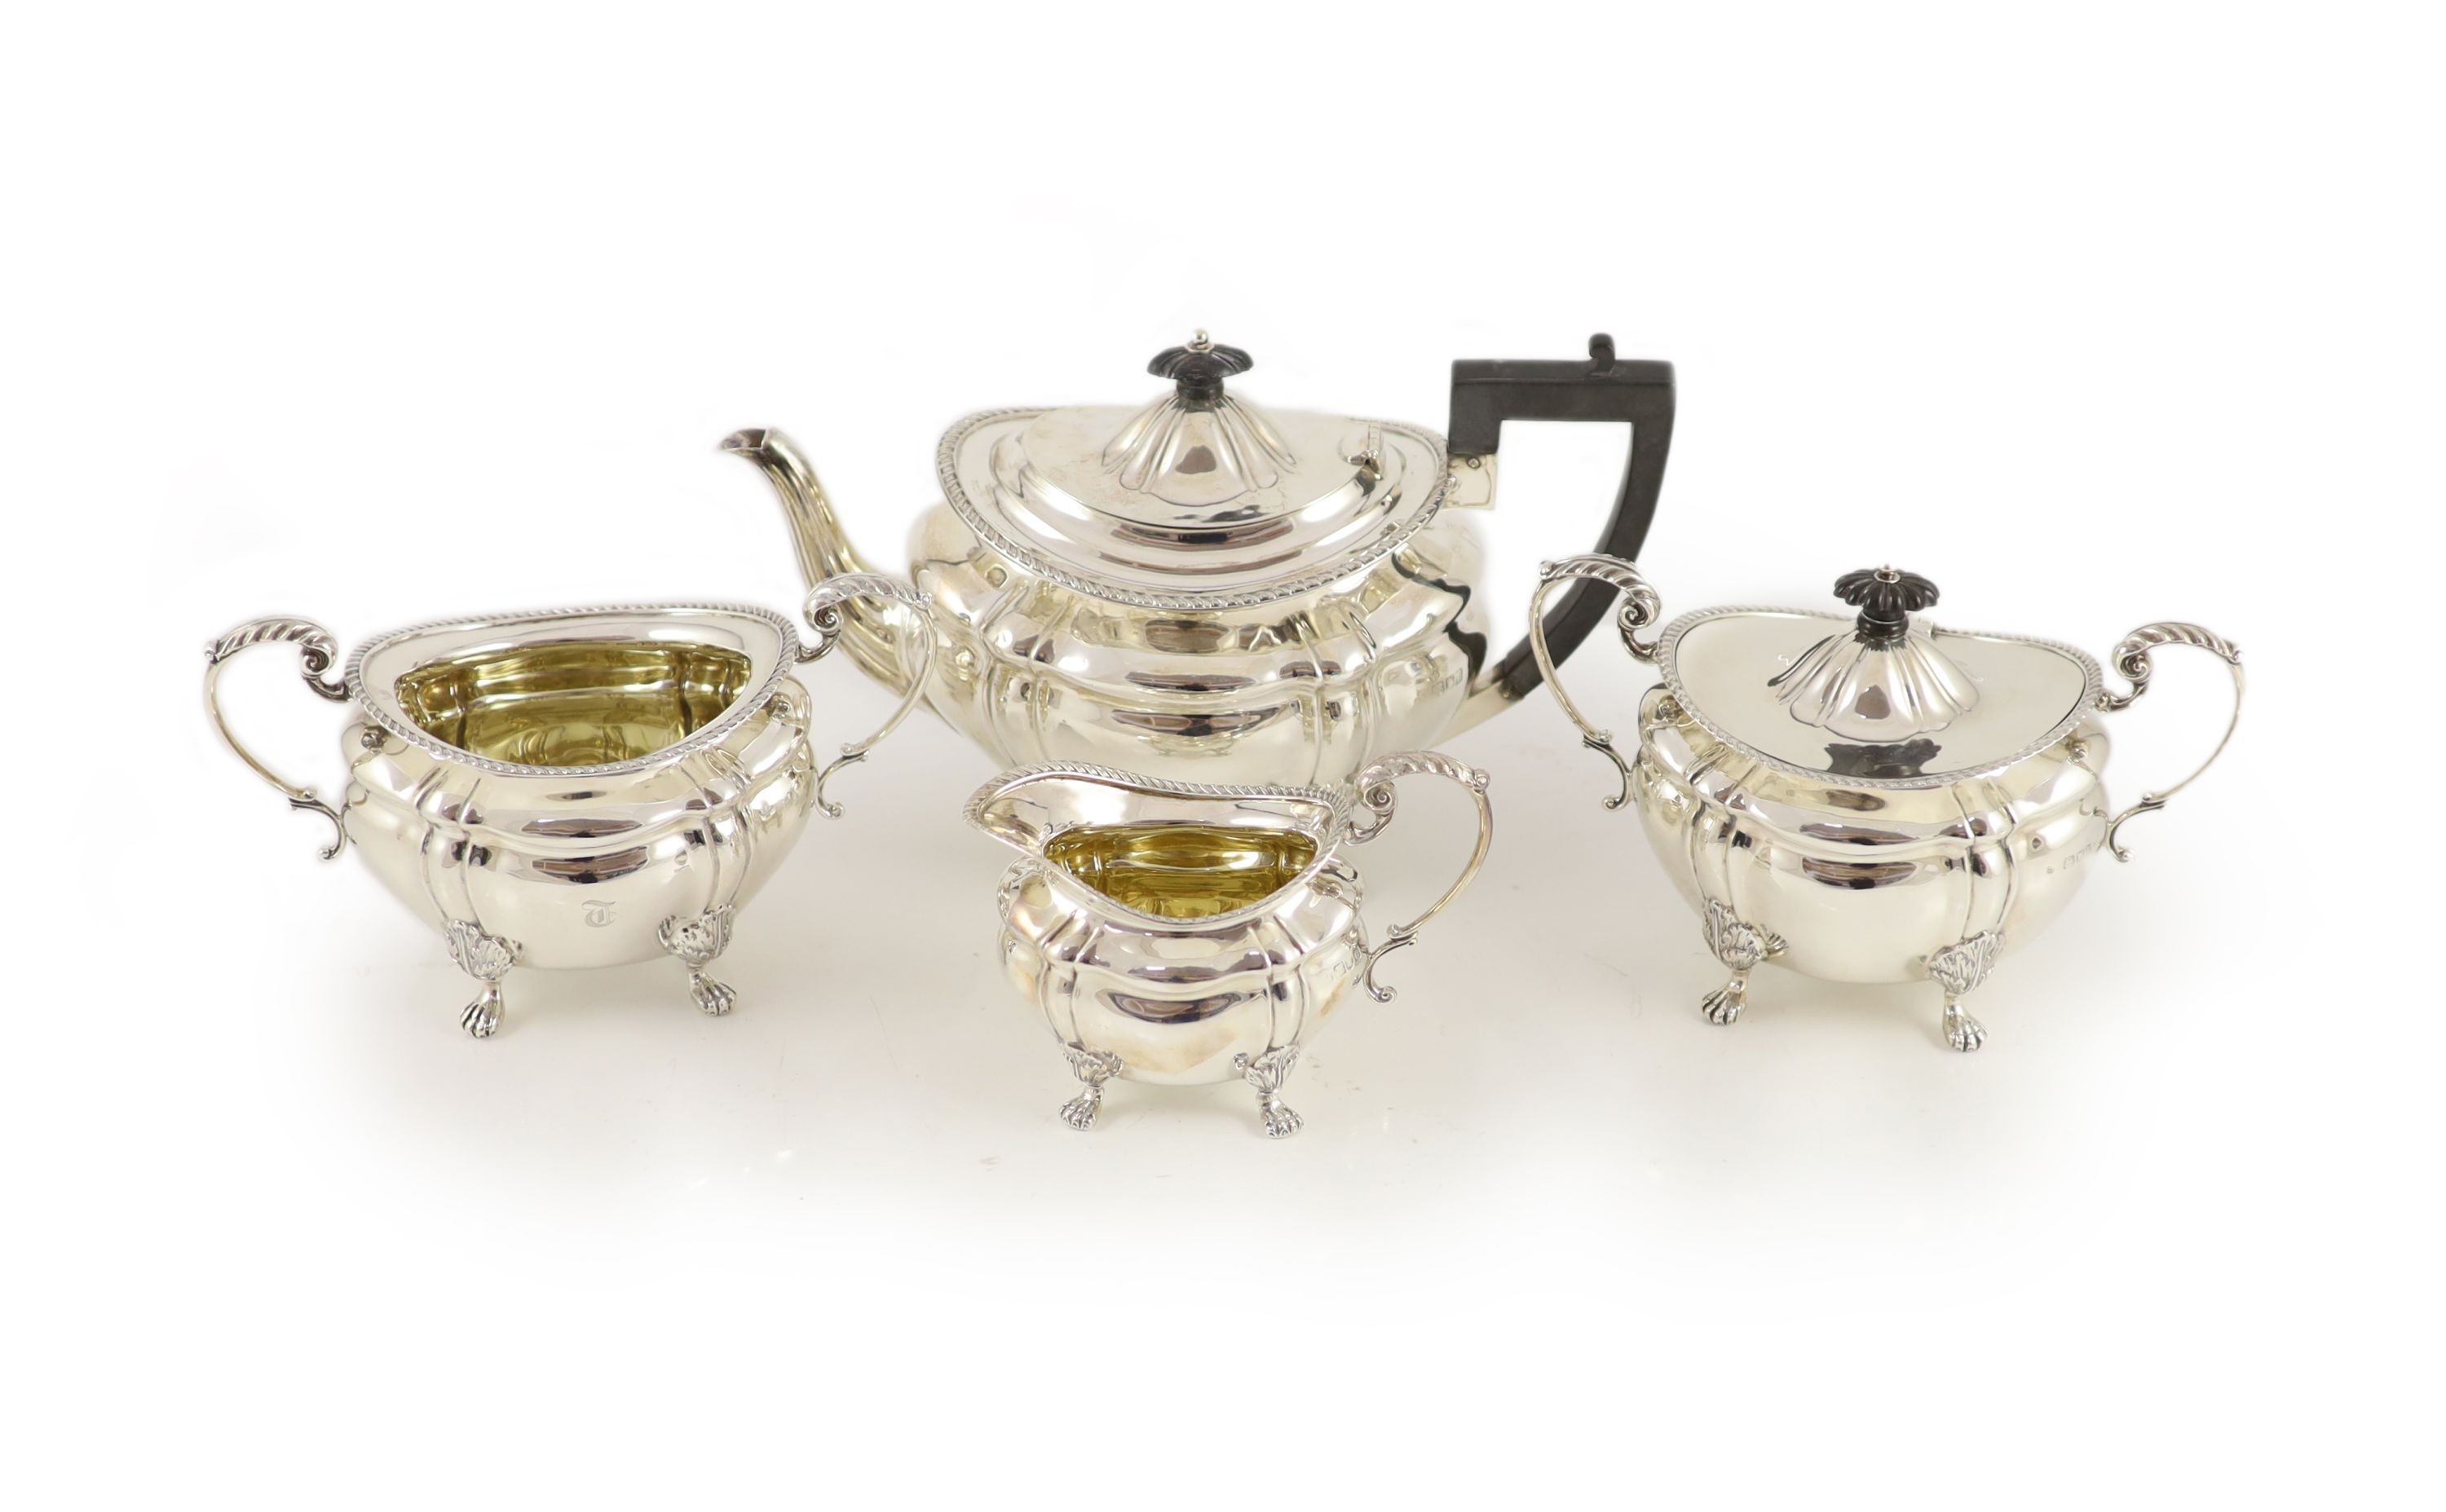 A late Victorian four-piece silver tea set comprising teapot, lidded bowl, twin handed sugar basin and jug with gilded bowls throughout, Josiah Williams & Co, London, 1900